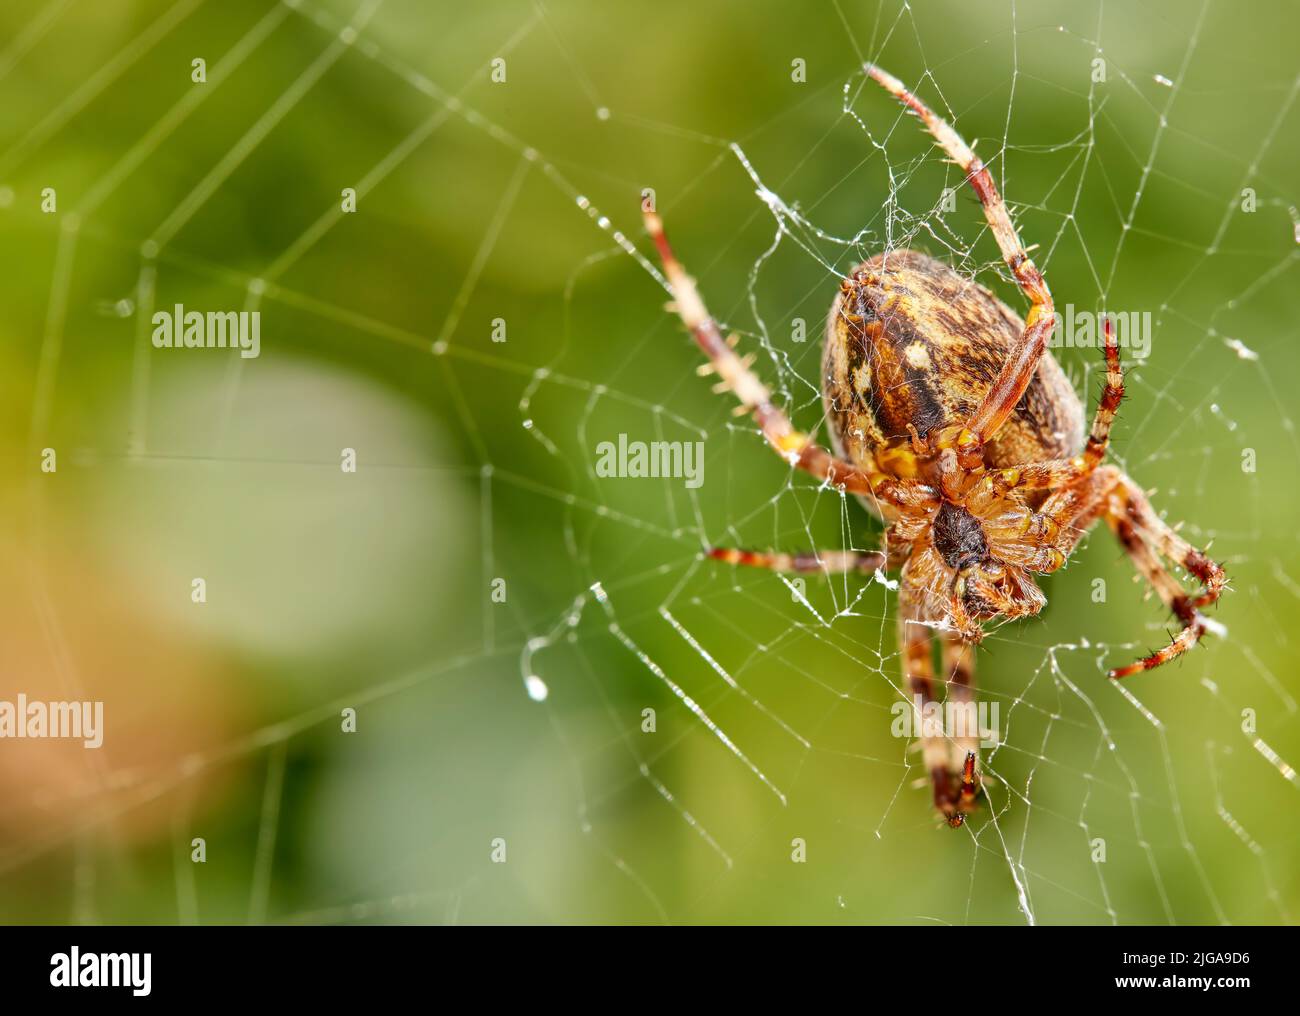 Closeup of a spider in a web against blurred leafy background. An eight legged Walnut orb weaver spider making cobweb in nature surrounded by green Stock Photo